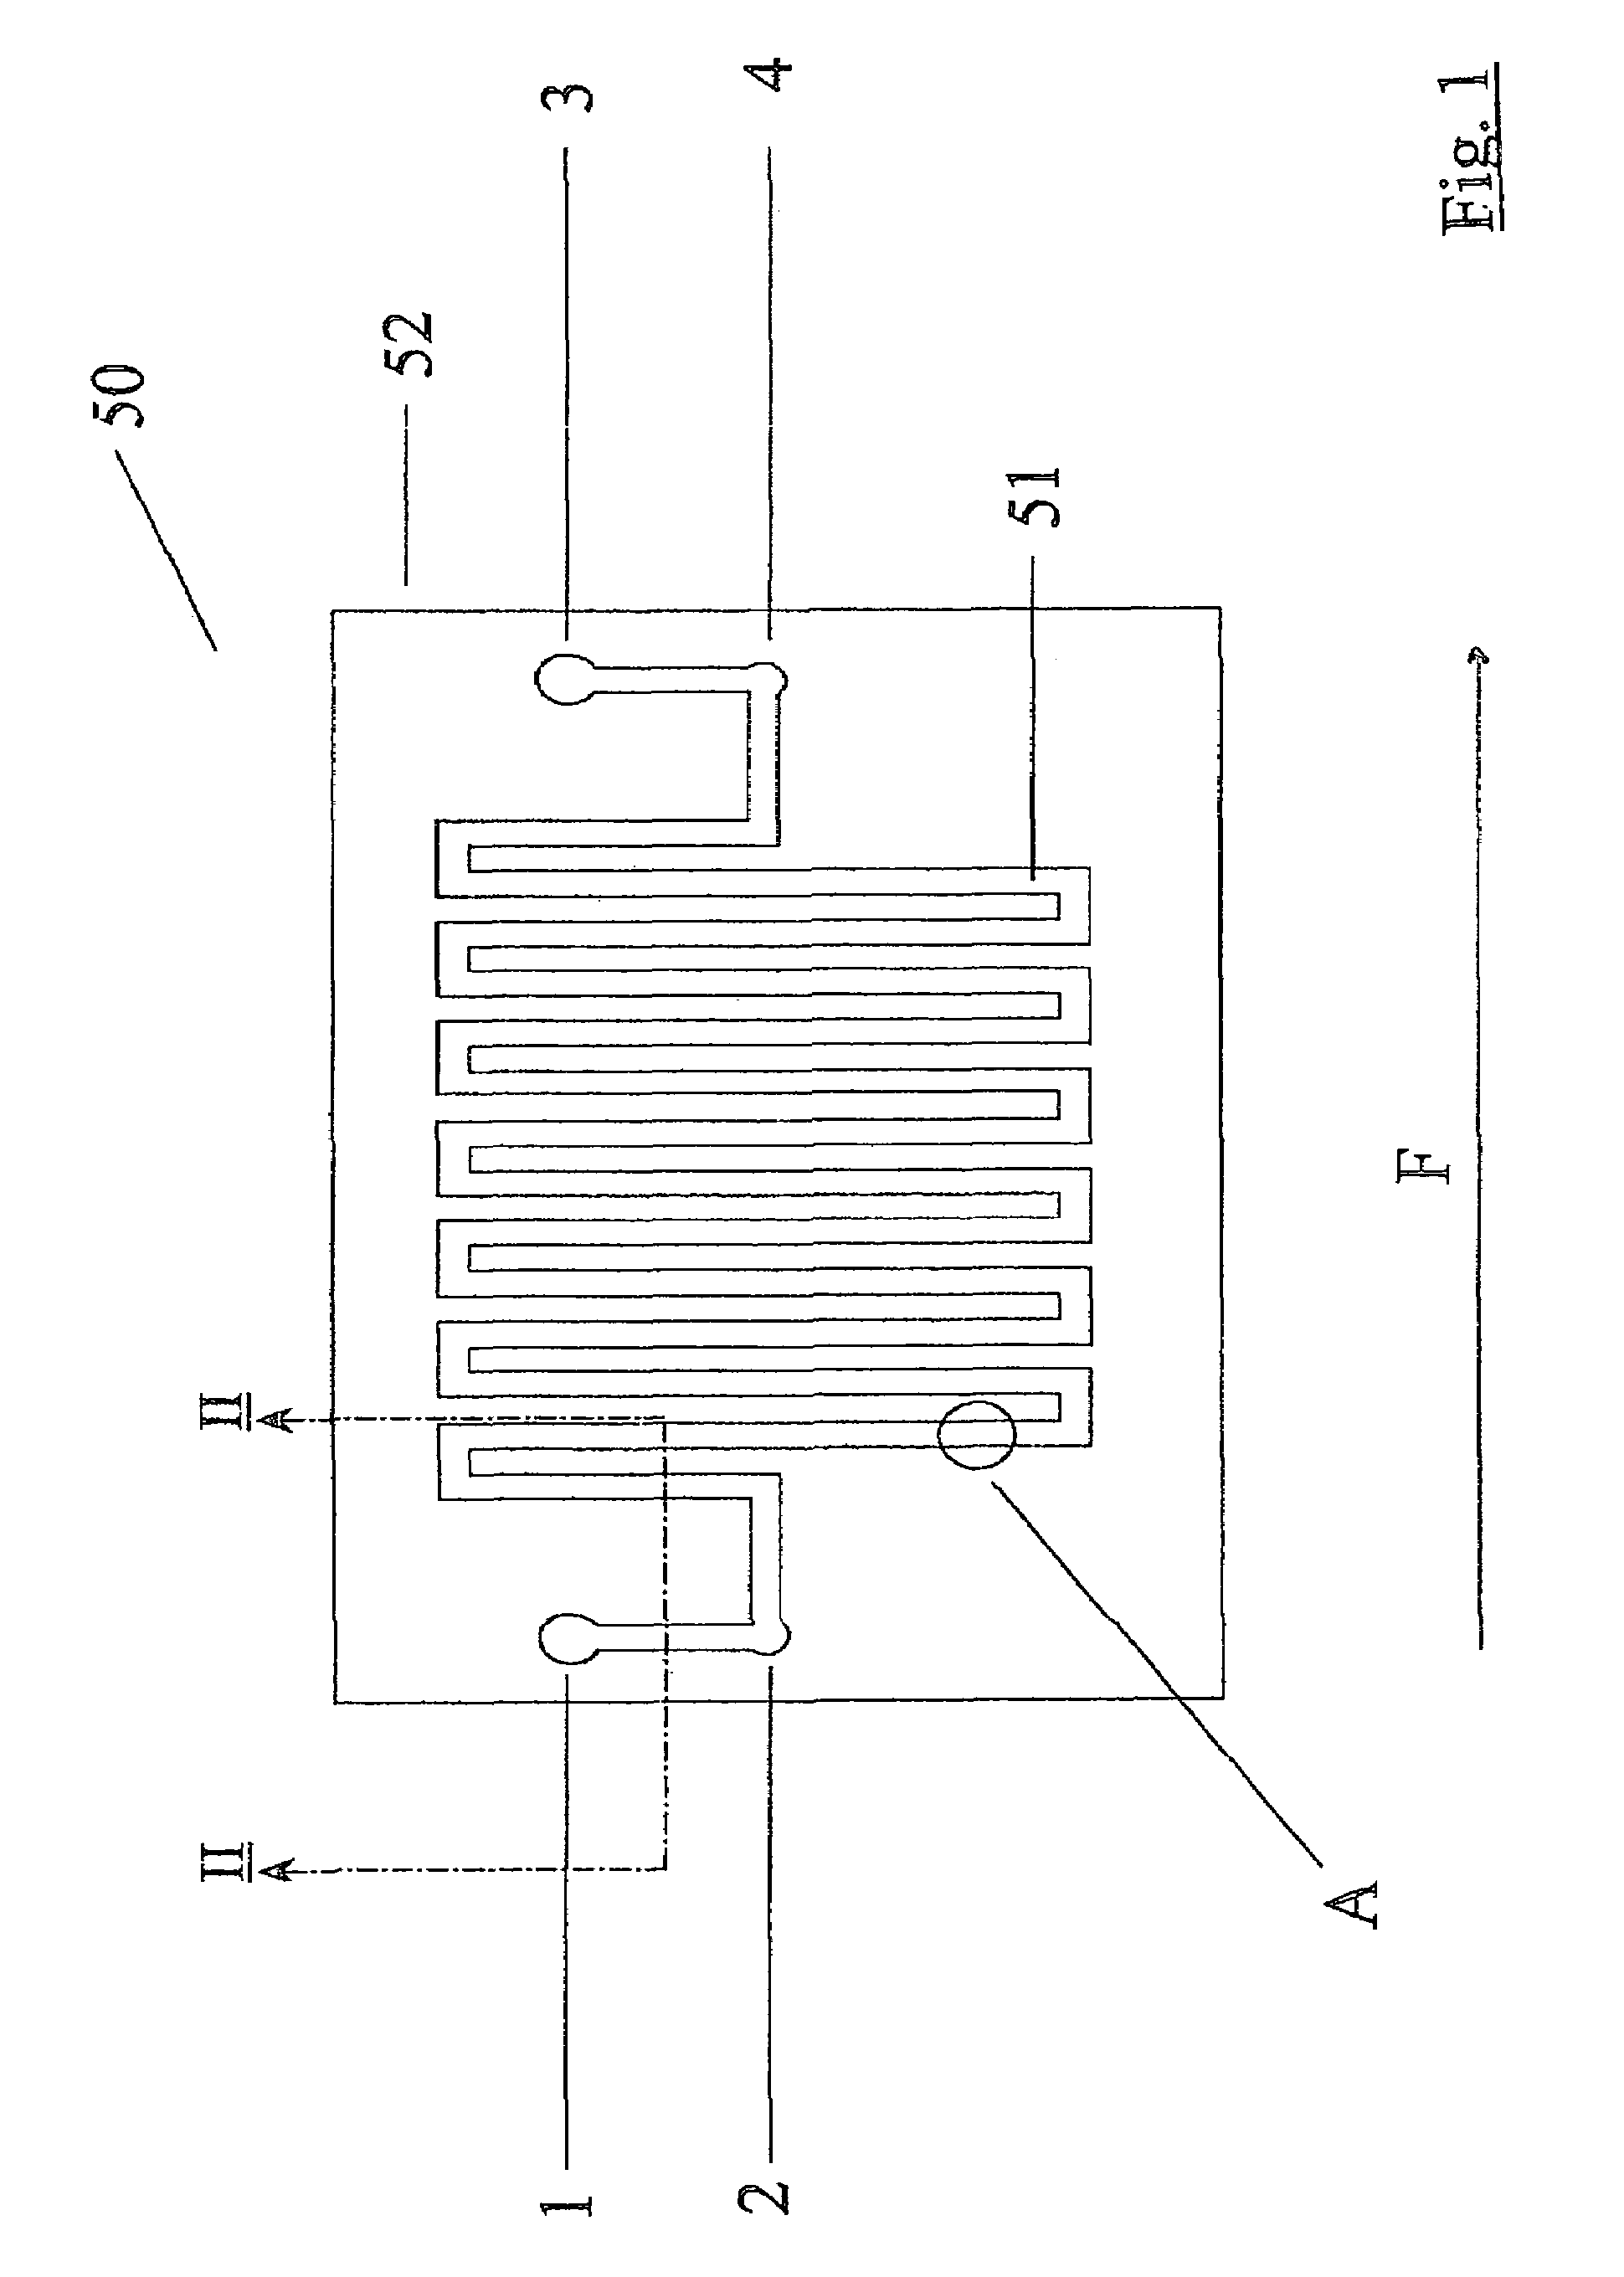 Method of assaying cellular adhesion with a coated biochip